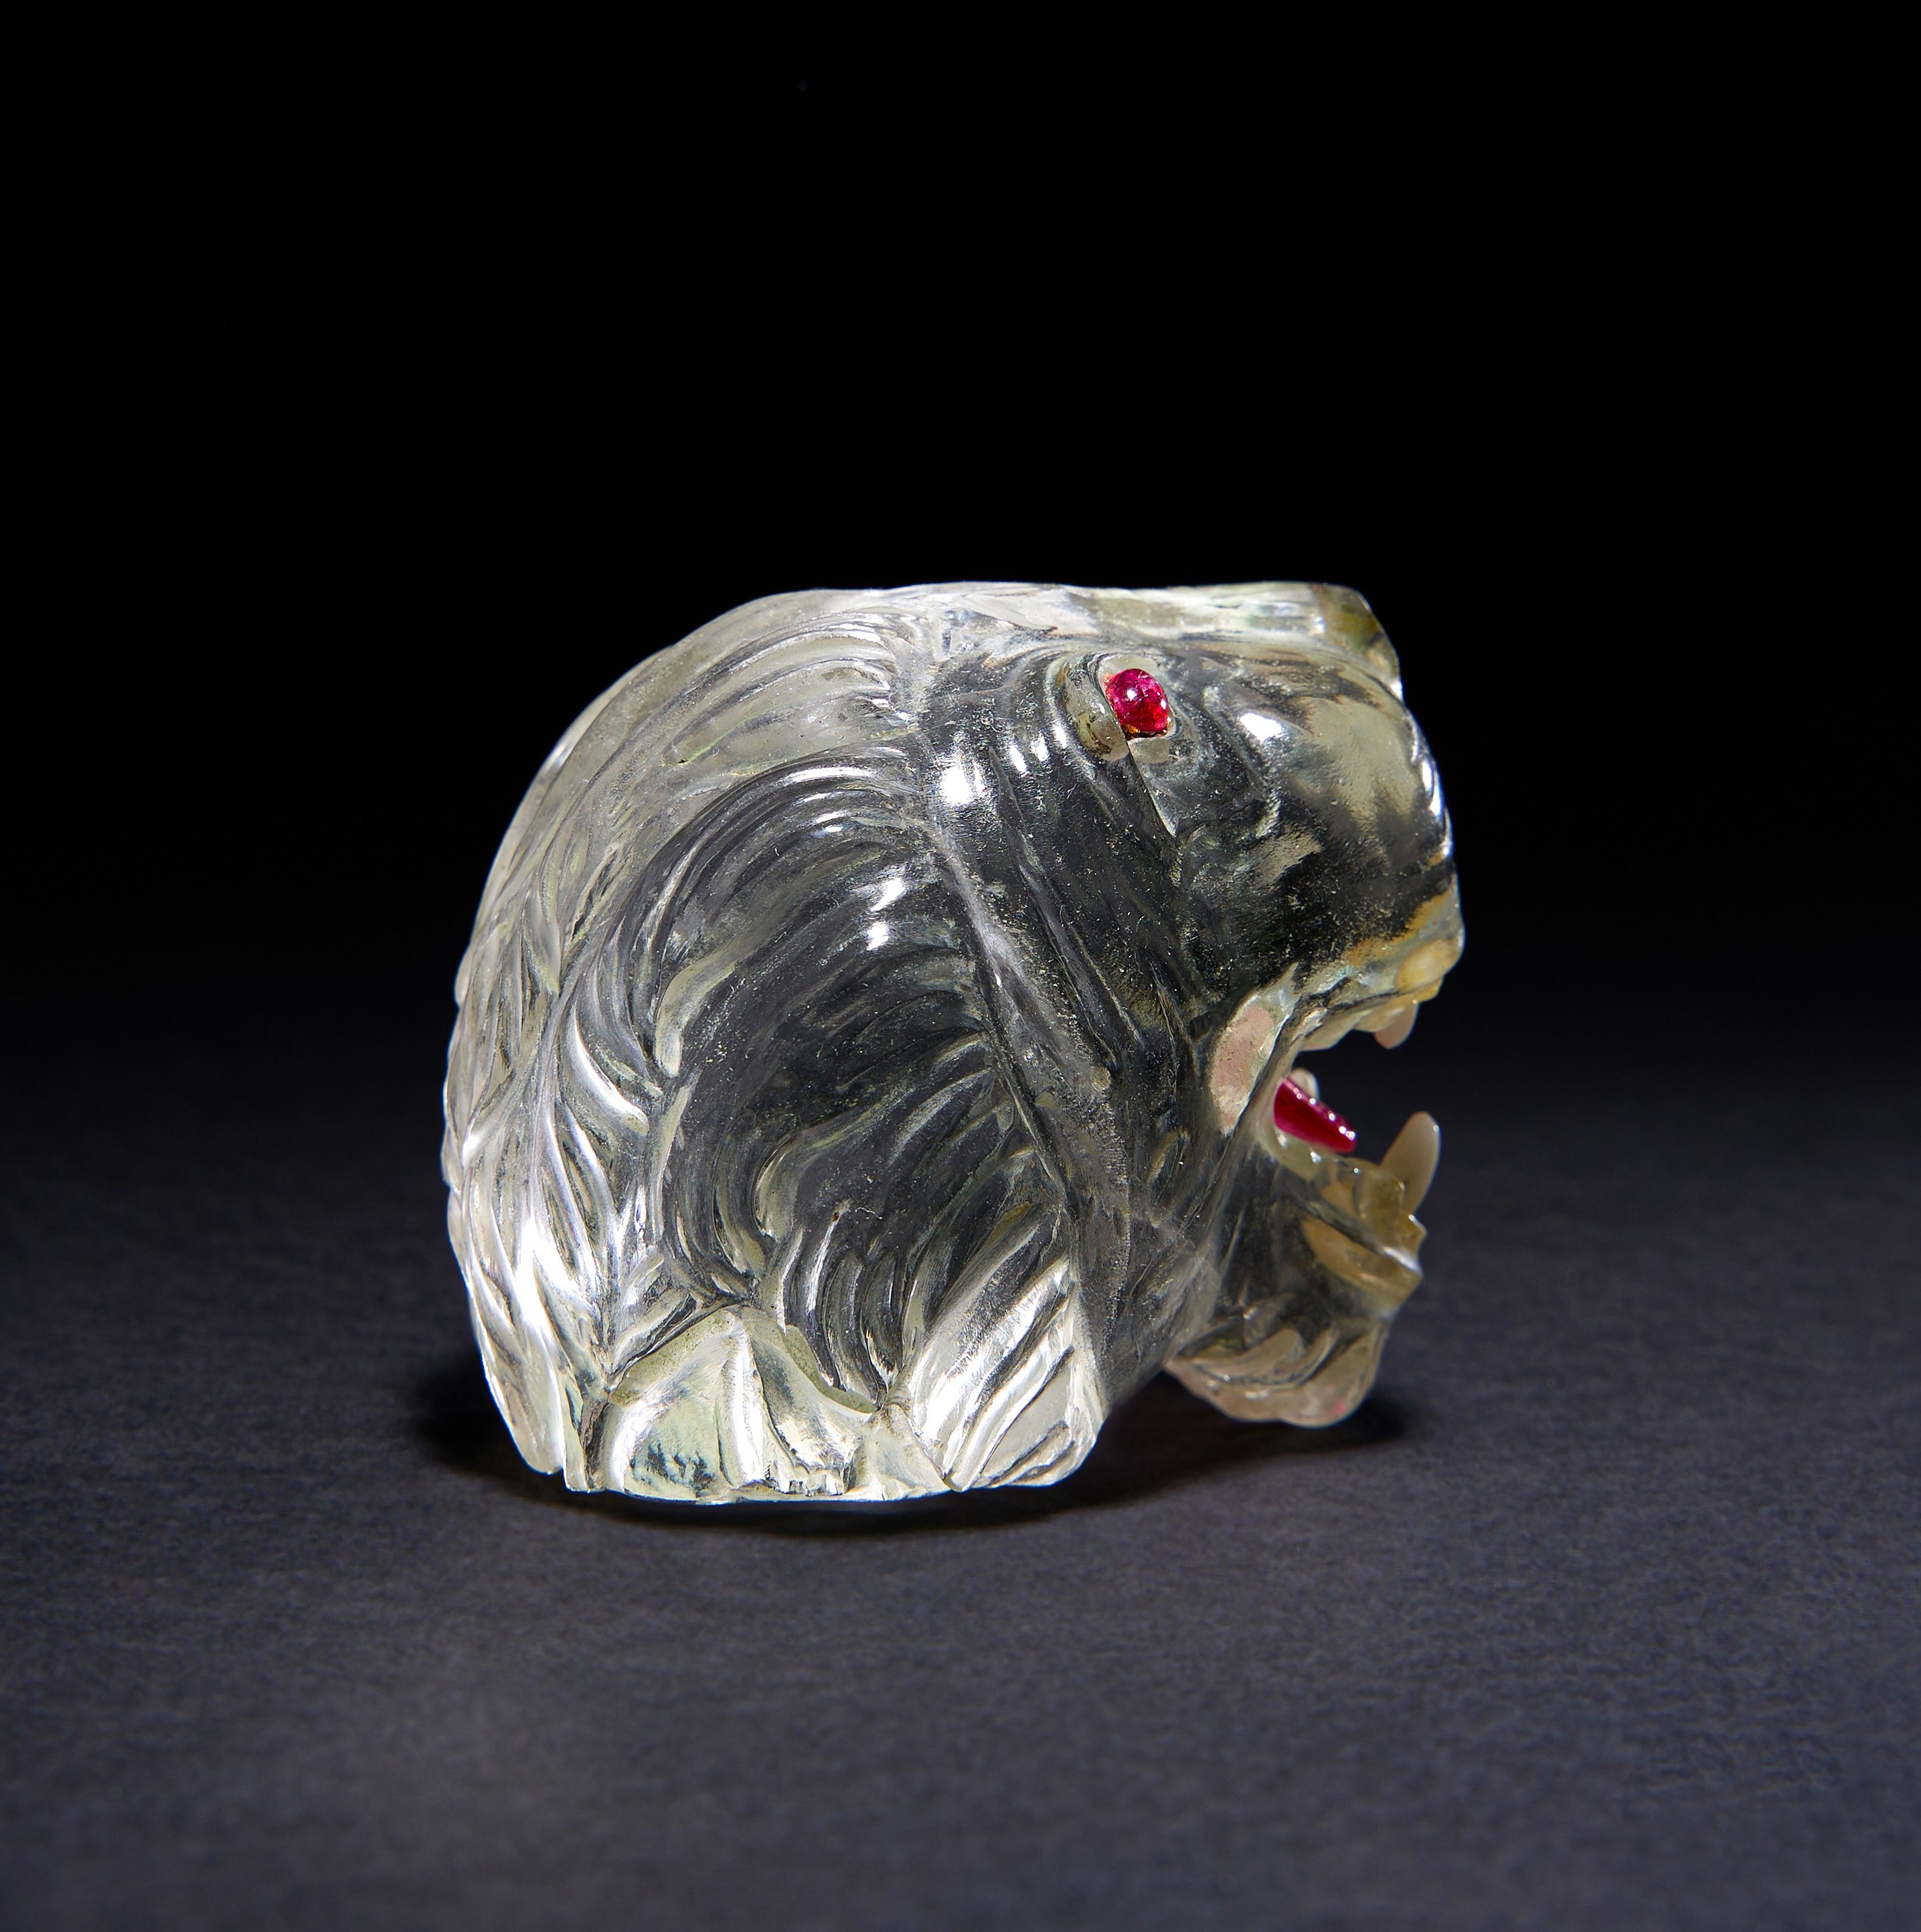 A LARGE MUGHAL GEM SET ROCK CRYSTAL CARVING OF A TIGHER HEAD WITH RUBY EYES & TONGUE, 18TH/19TH CENT - Image 2 of 2